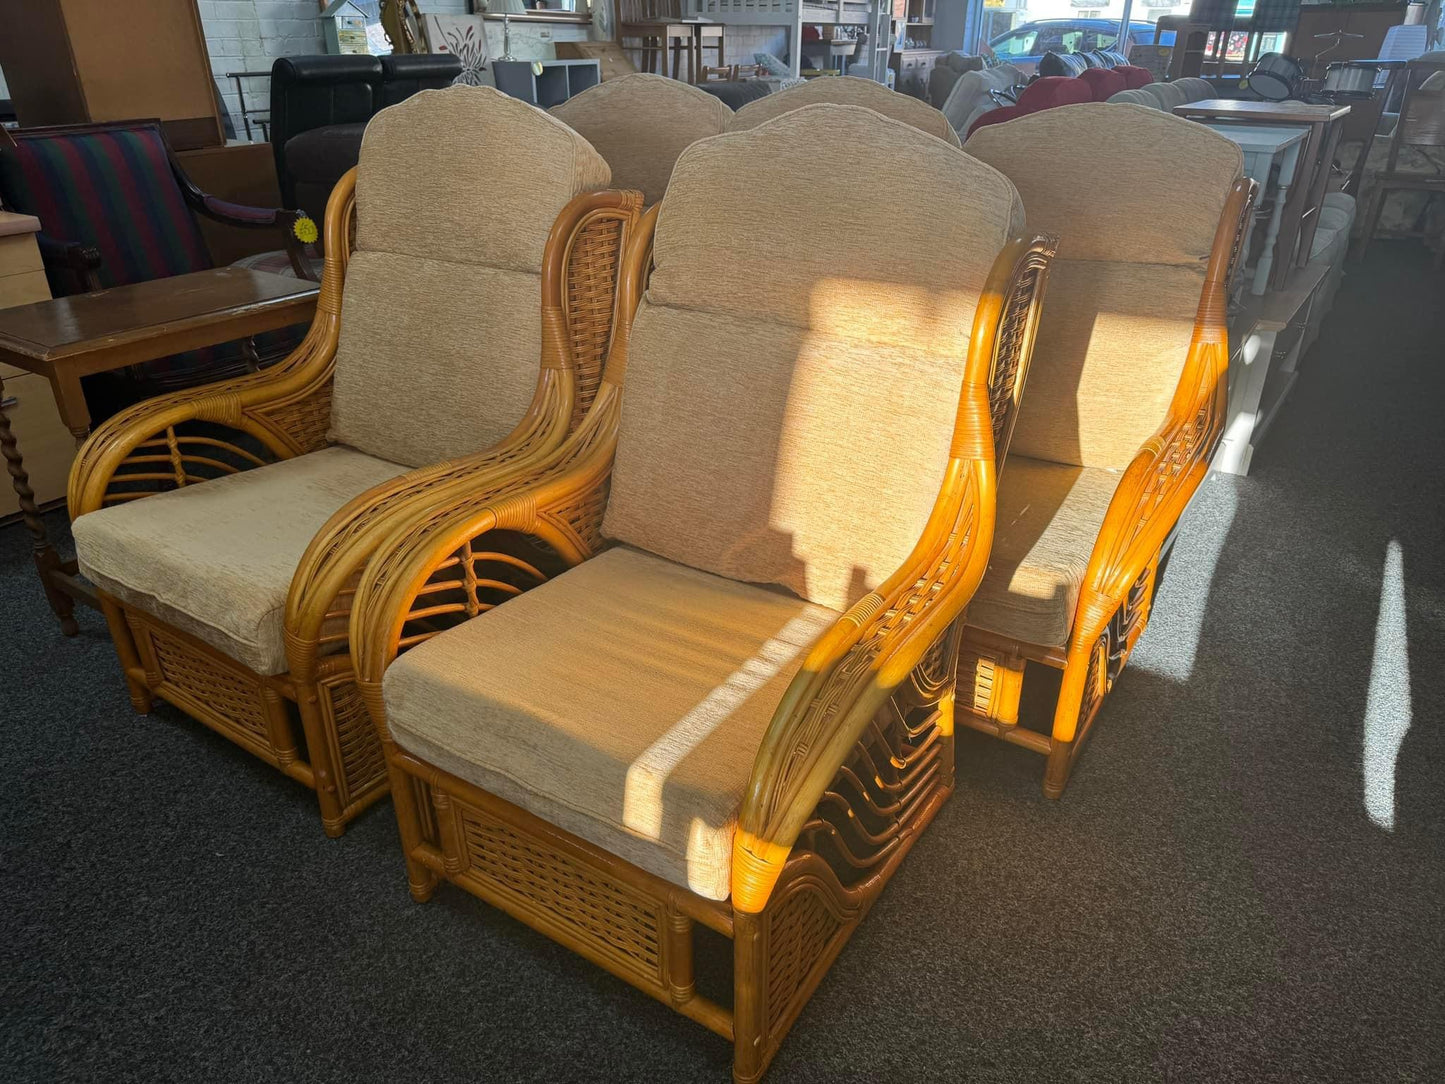 Whicker 3 seater sofa and 2 chairs